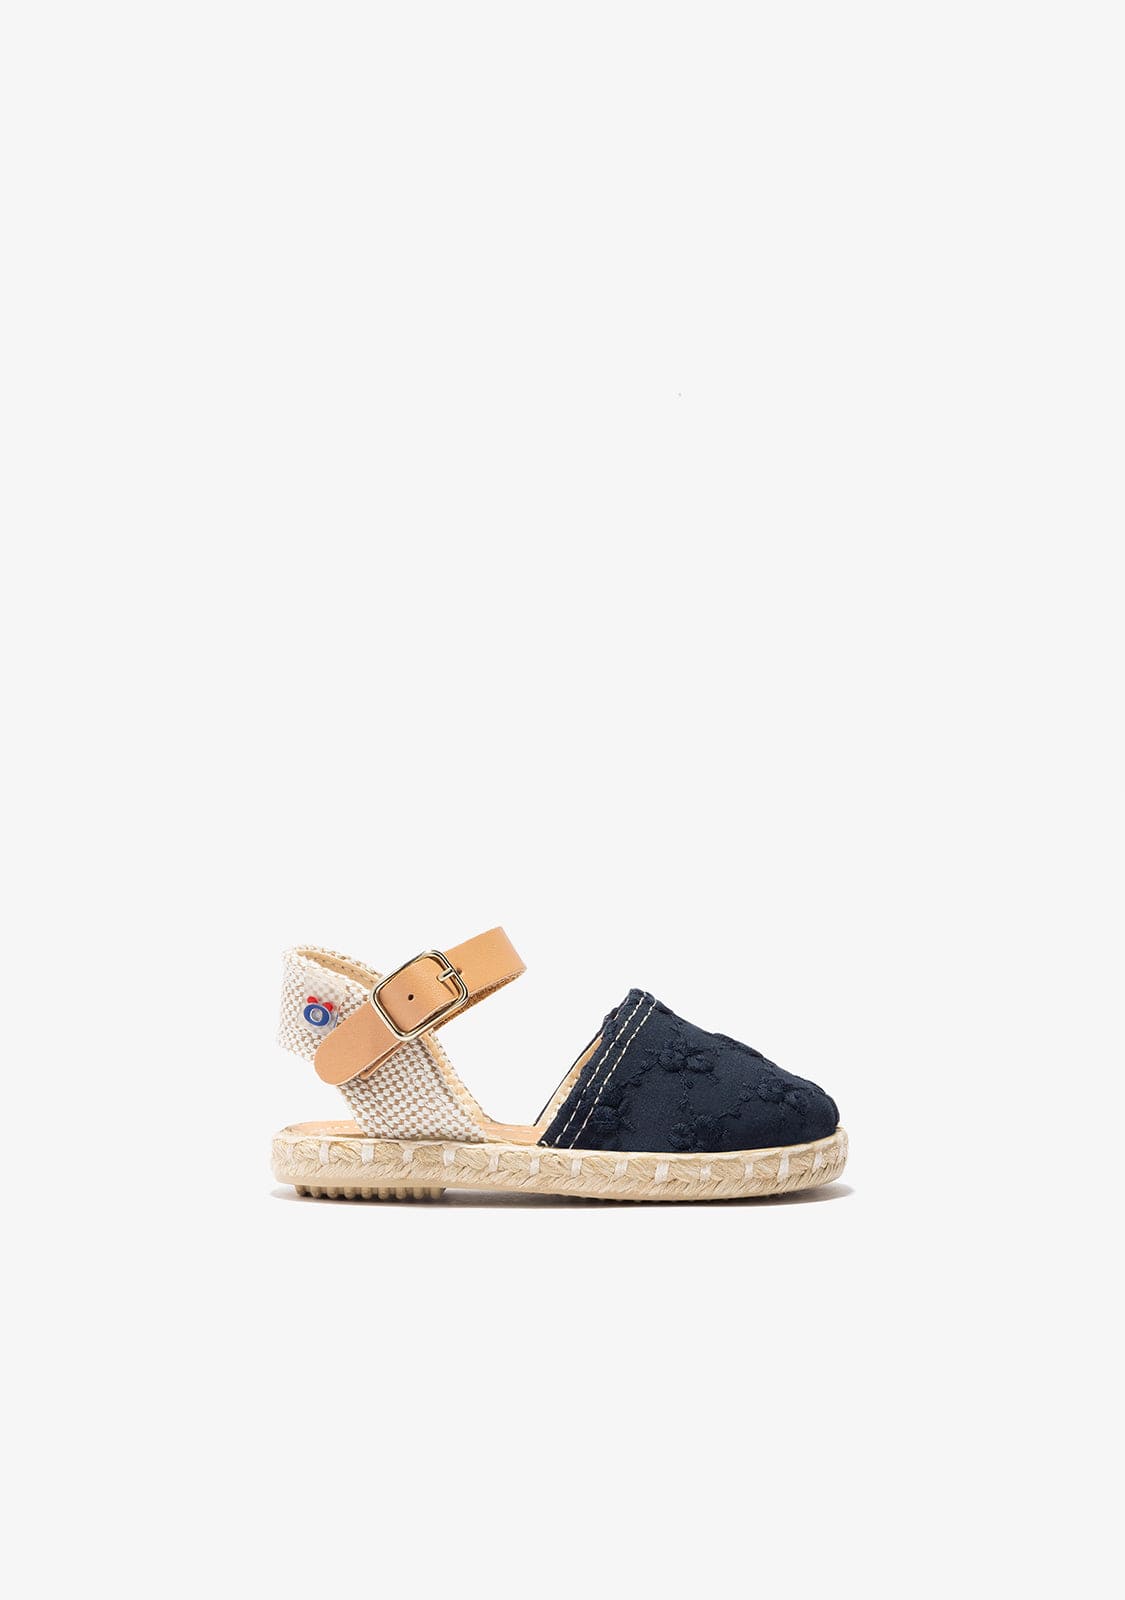 OSITO Shoes Baby's Navy Denim Embroidery Espadrilles